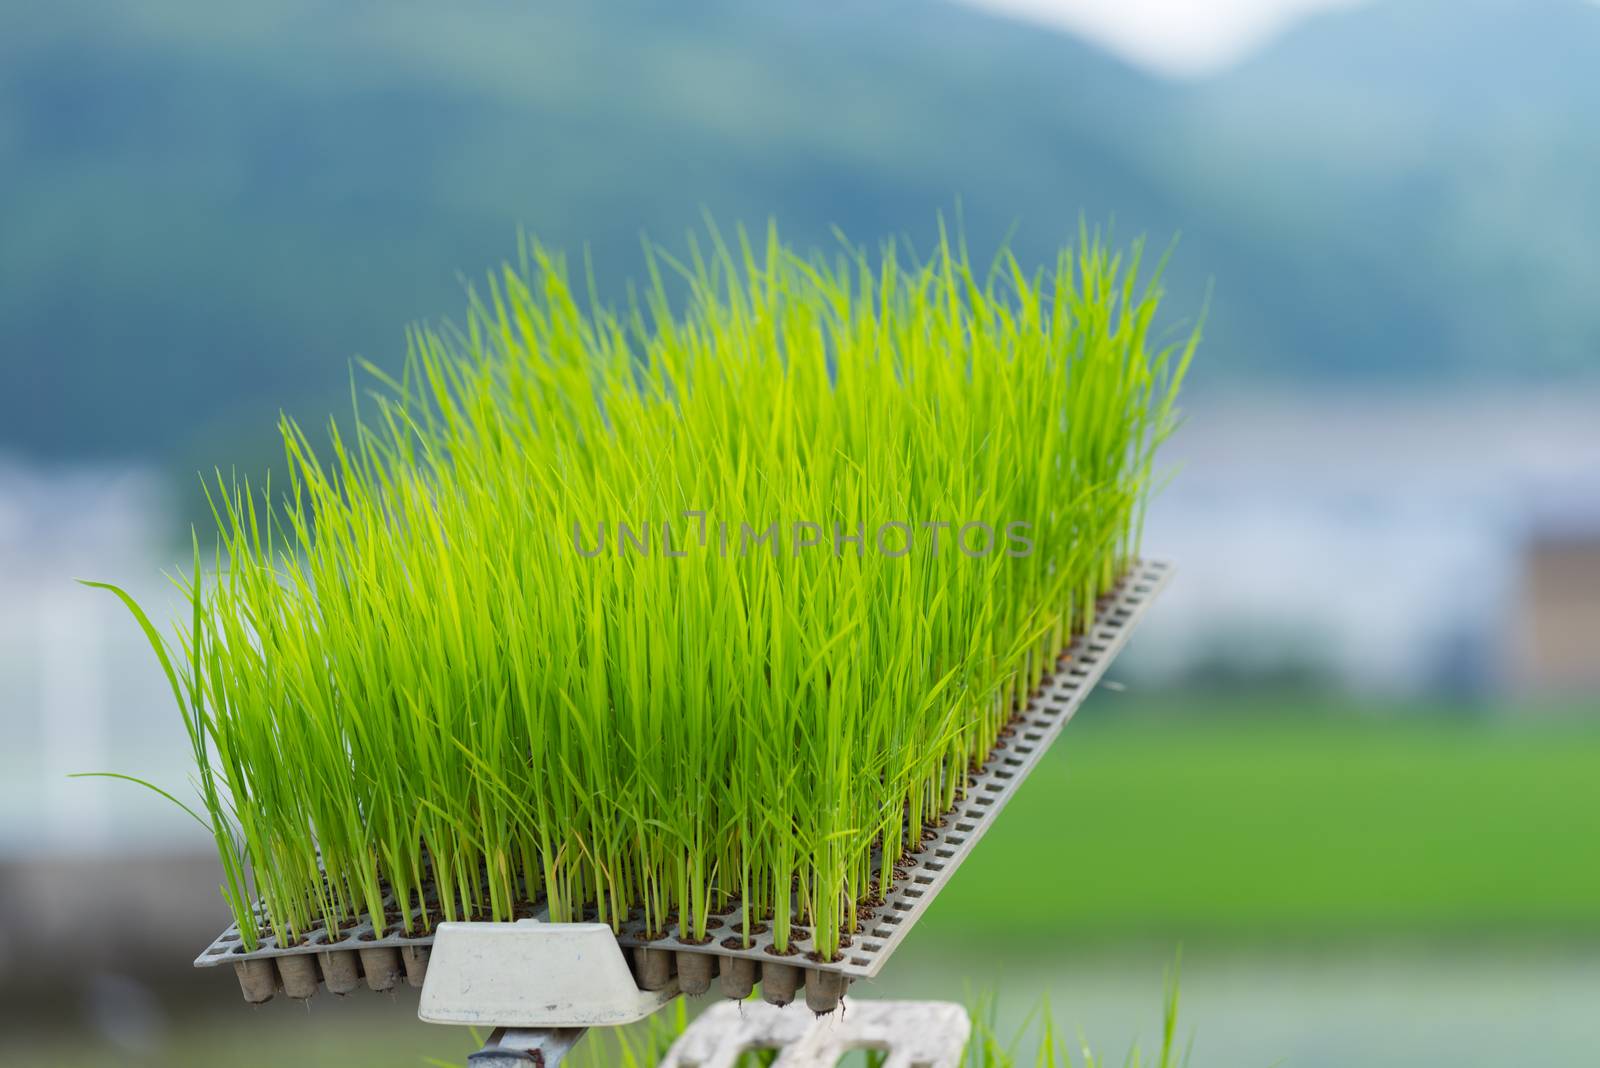 A tray of small rice seedlings with rice fields and mountains in the background.